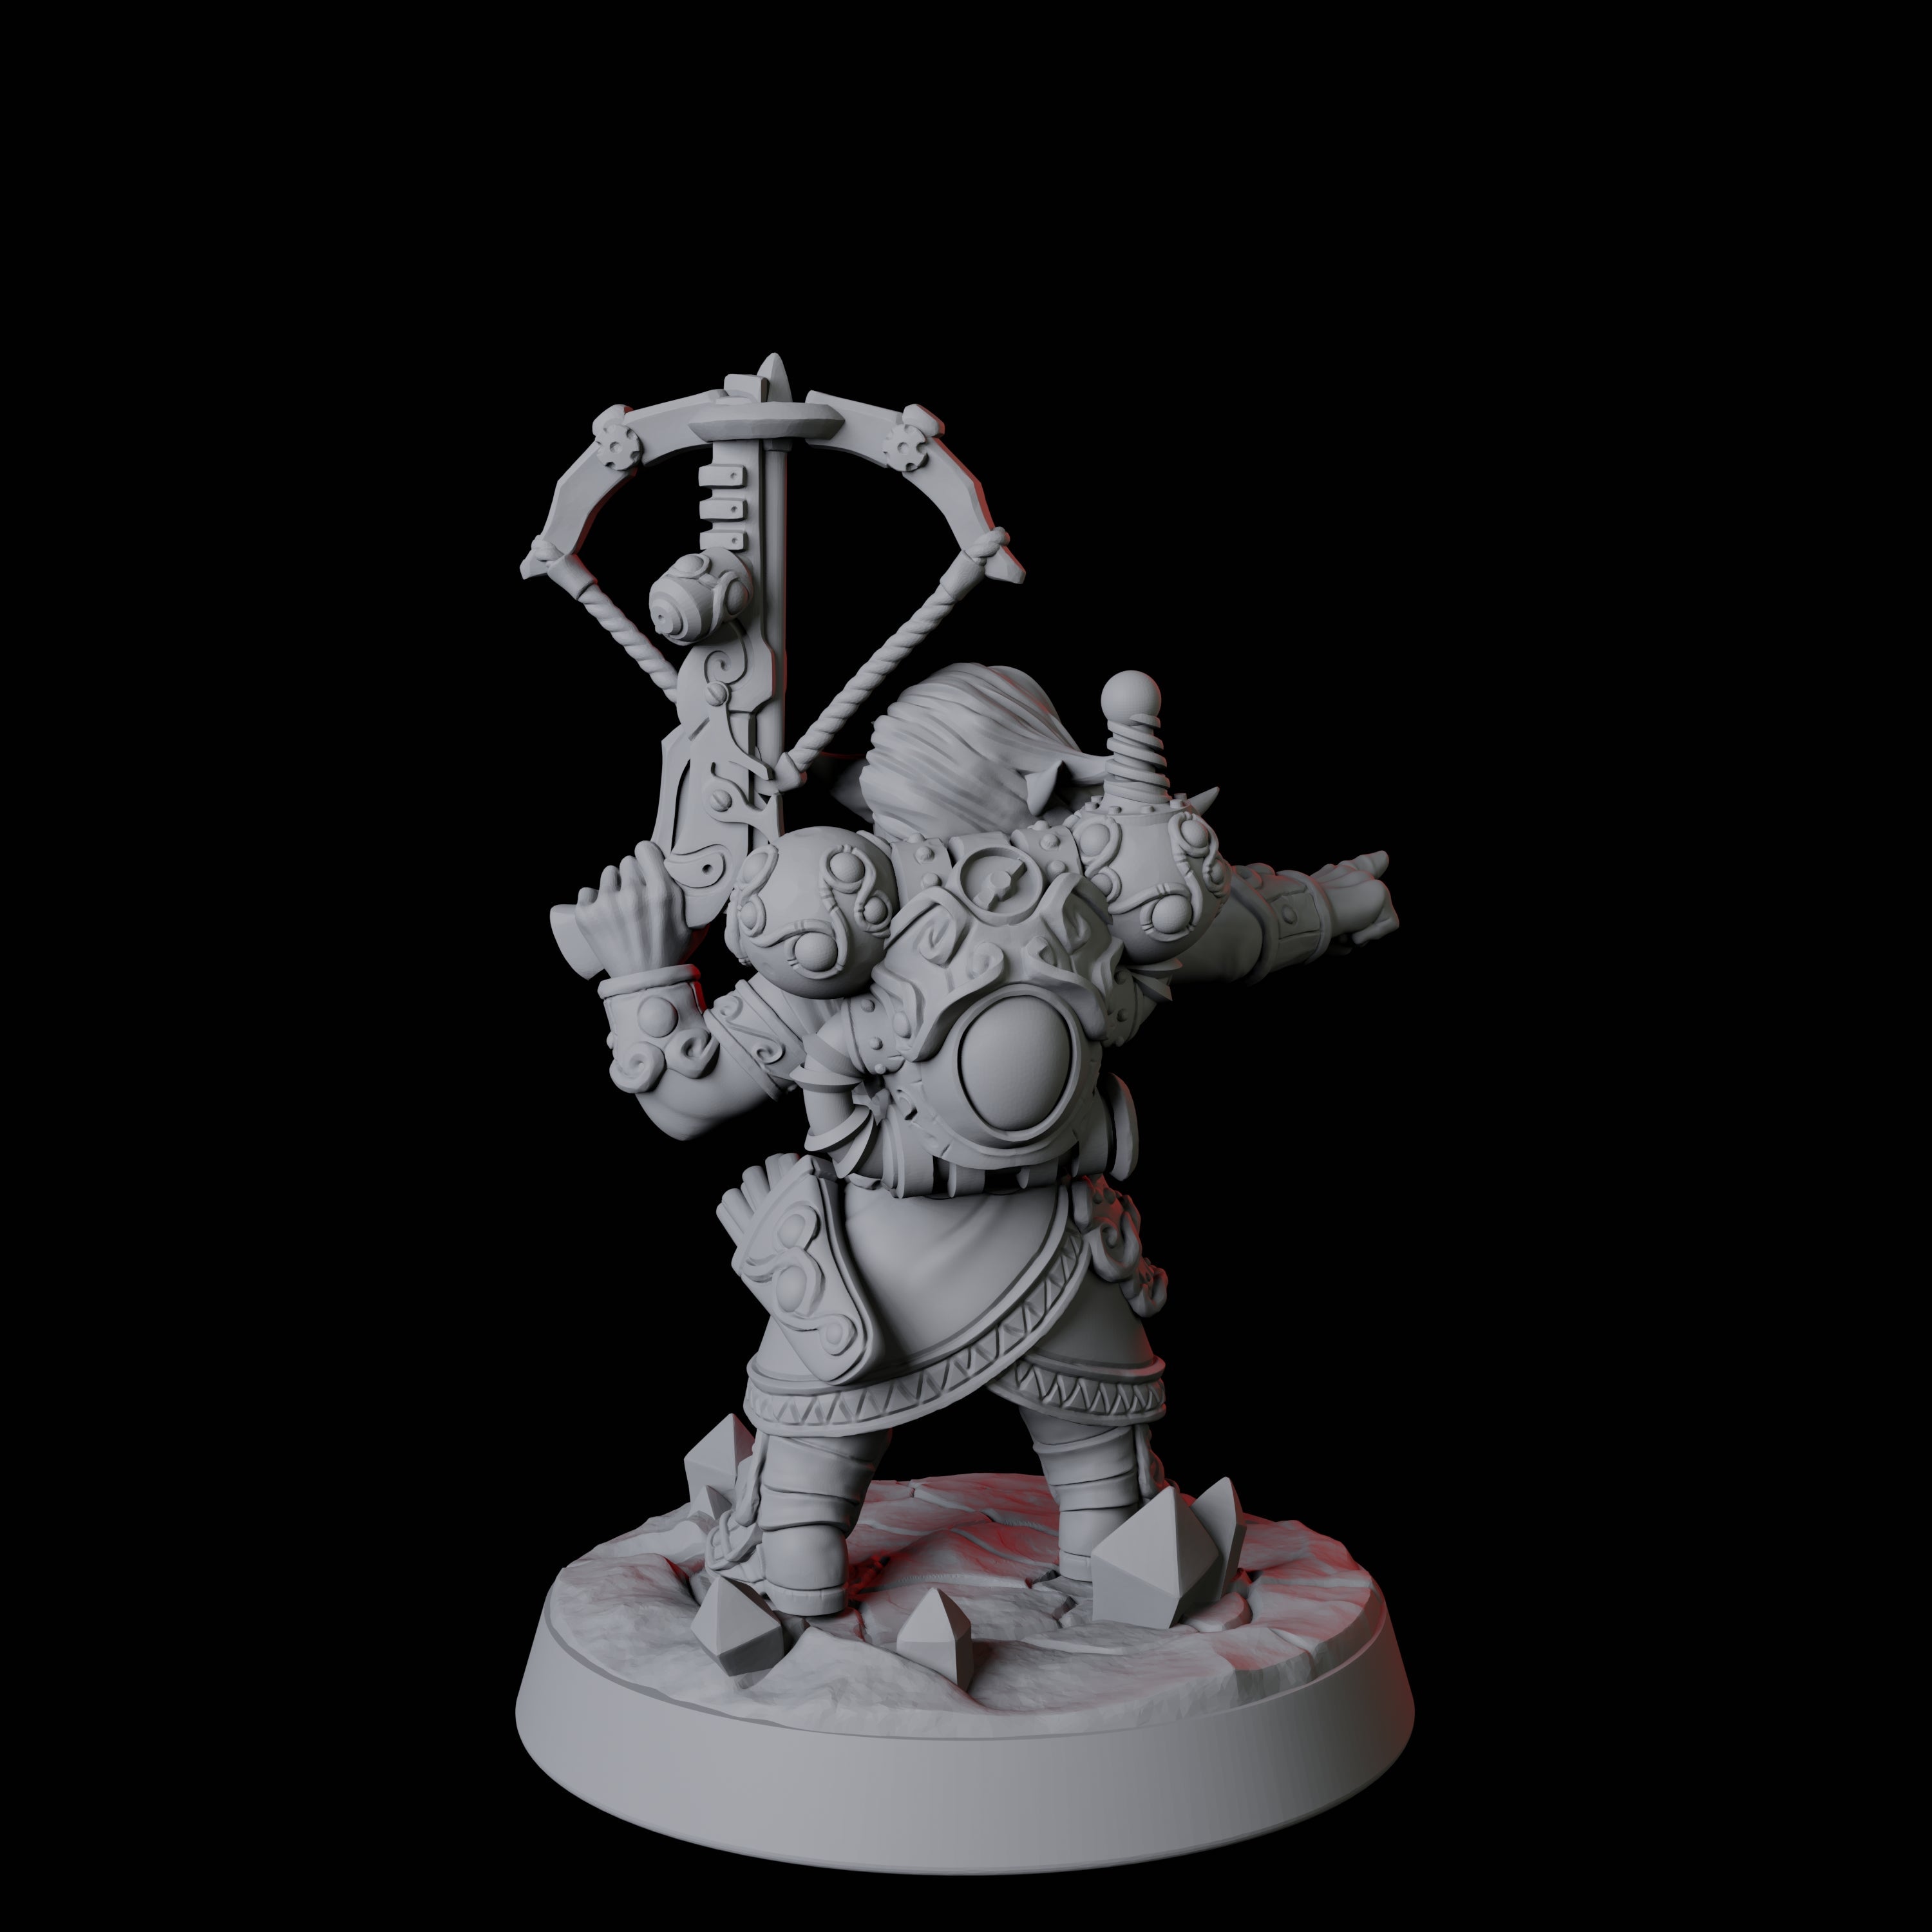 Deep Gnome Artificer E Miniature for Dungeons and Dragons, Pathfinder or other TTRPGs